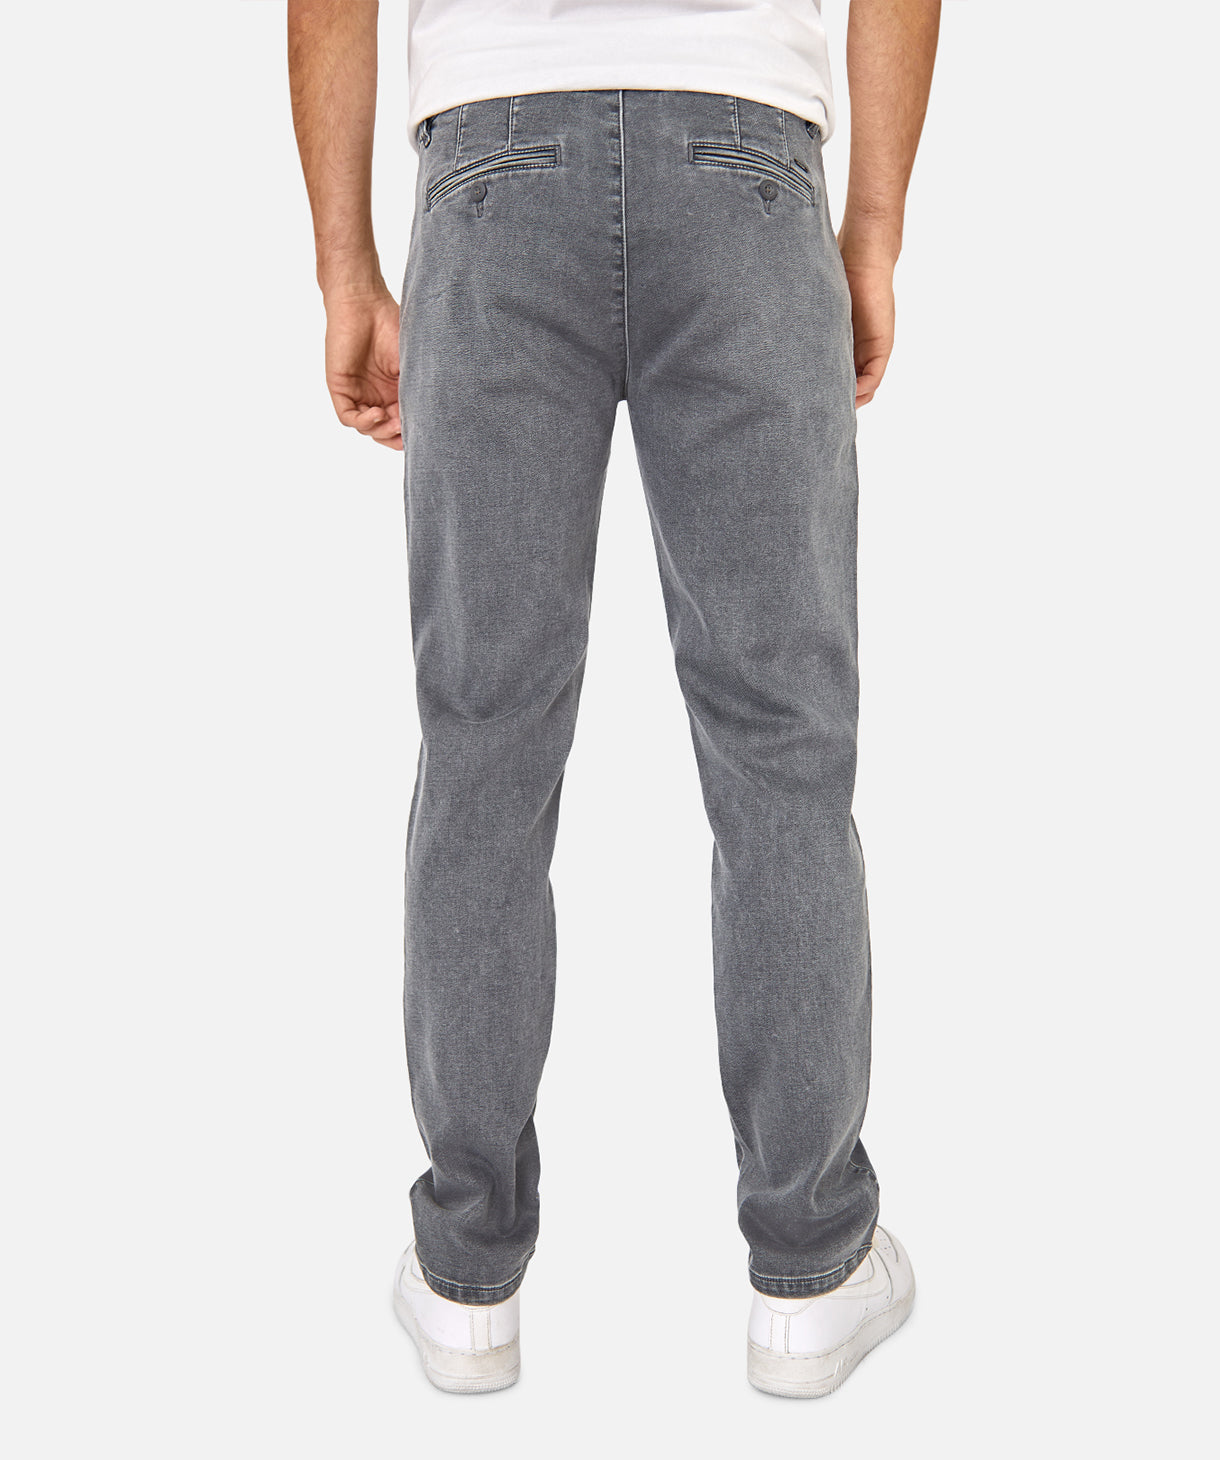 BASICS casual_trousers_men_westernwear : Buy BASICS Tapered Fit Laurel Grey  Stretch Trouser-21btr44219 Online | Nykaa Fashion